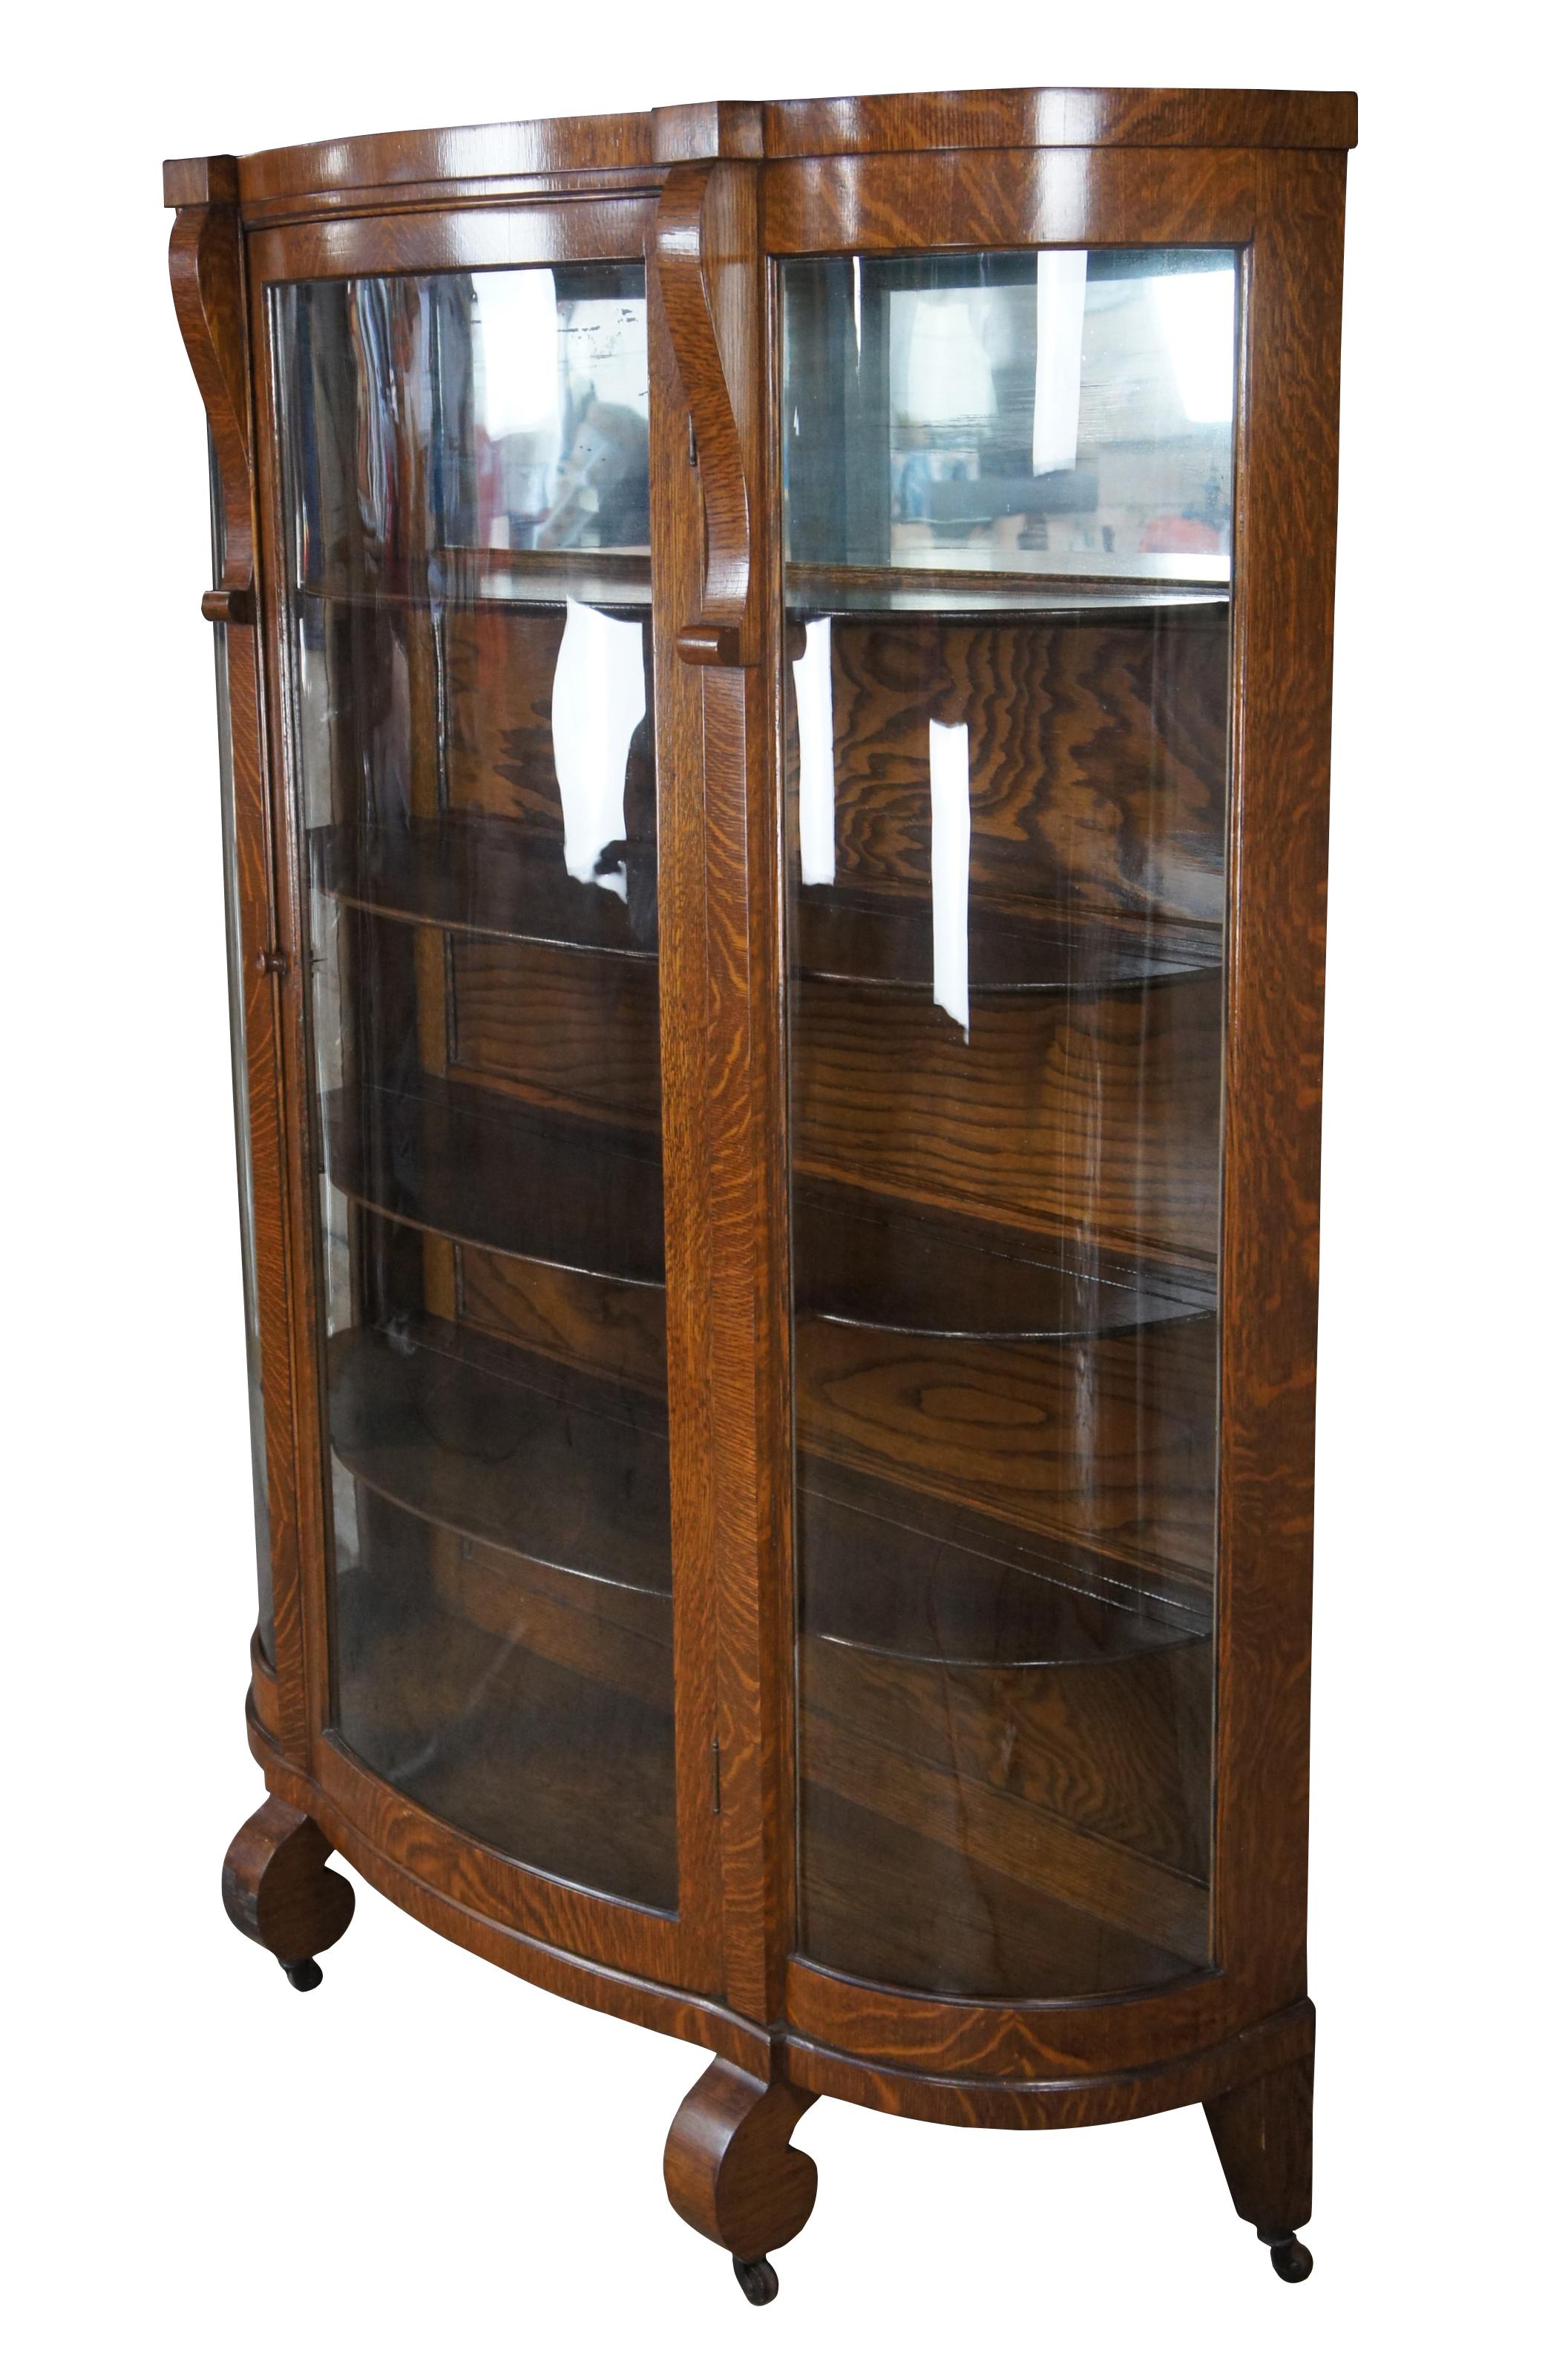 Antique Victorian Era American Empire demilune curved glass curio cabinet. Made from quartersawn oak with scrolled accents along the front leading to scrolled feet over casters.. Includes four shelves with plate groves and a mirror along the top.